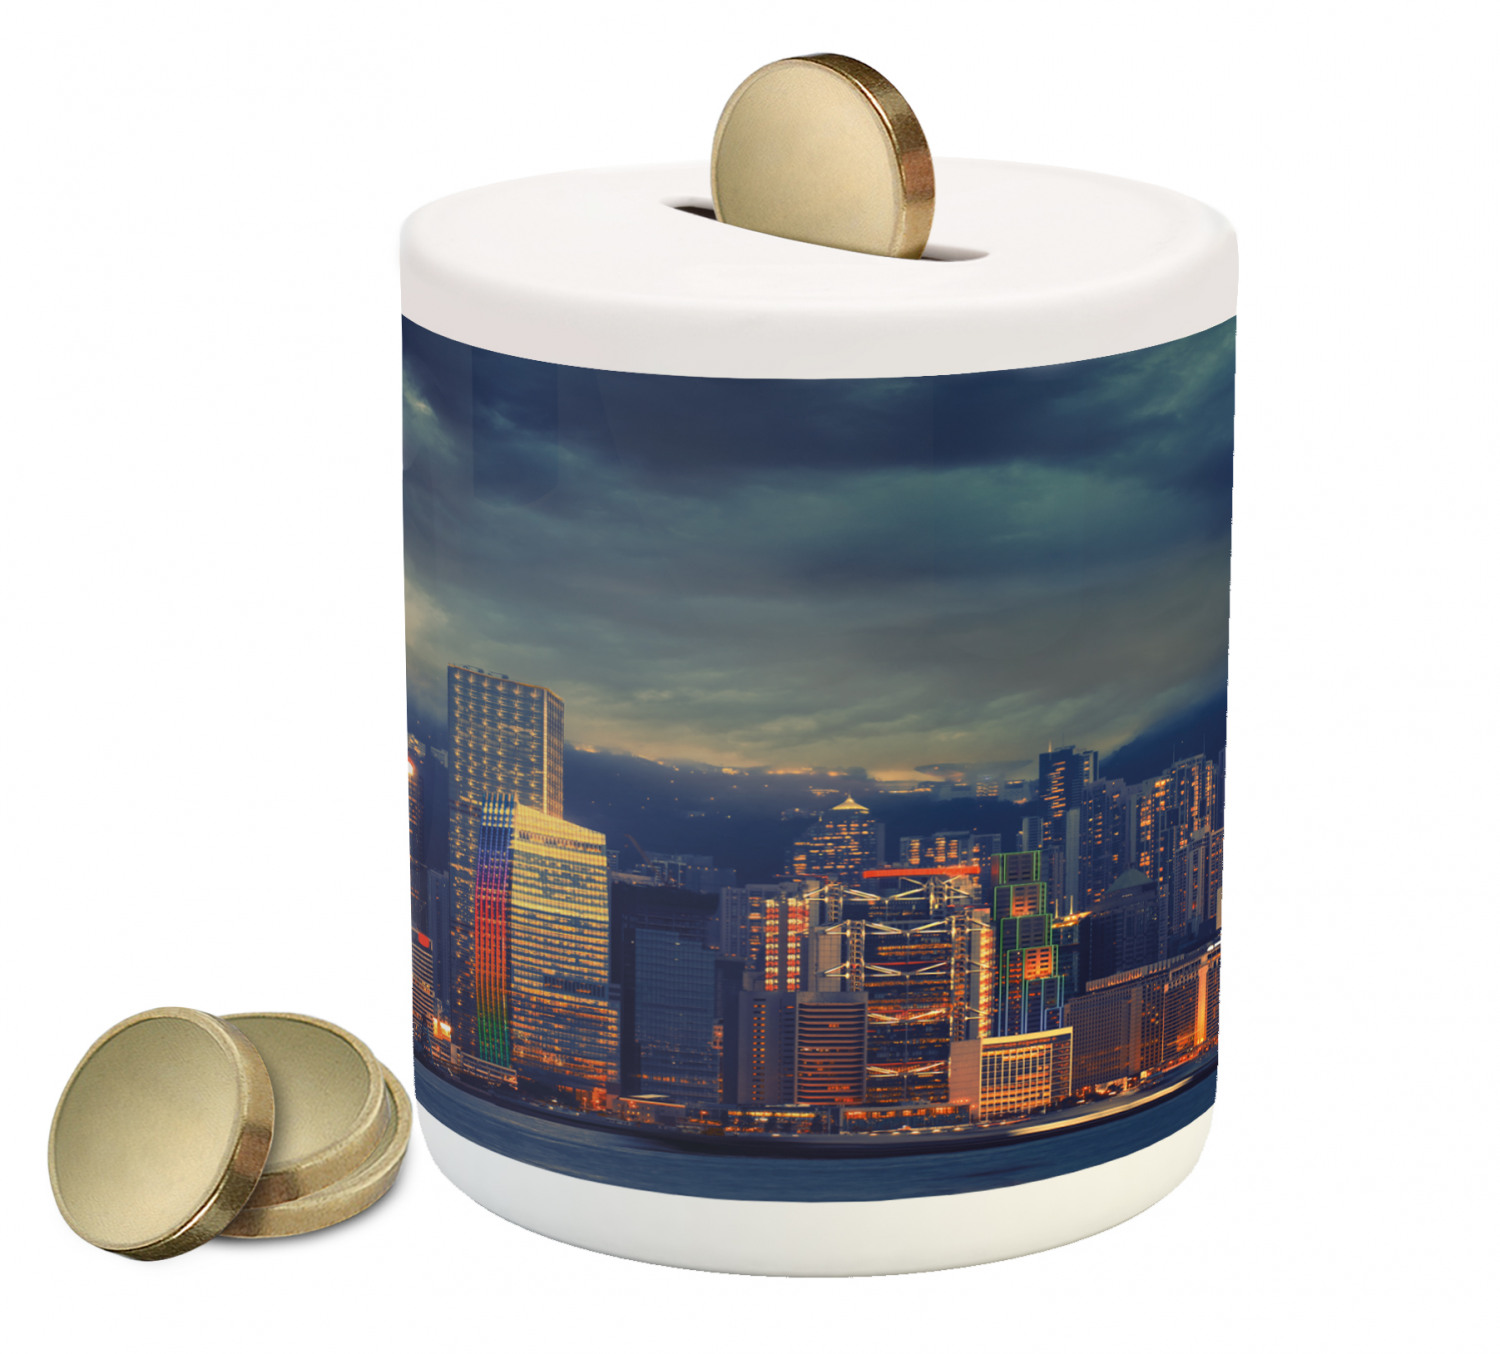 Cityscape Piggy Bank, Hong Kong Cityscape Stormy Weather Dark Cloudy Sky Waterfront Port Dramatic View, Ceramic Coin Bank Money Box for Cash Saving, 3.6" X 3.2", Multicolor, by Ambesonne - image 1 of 4